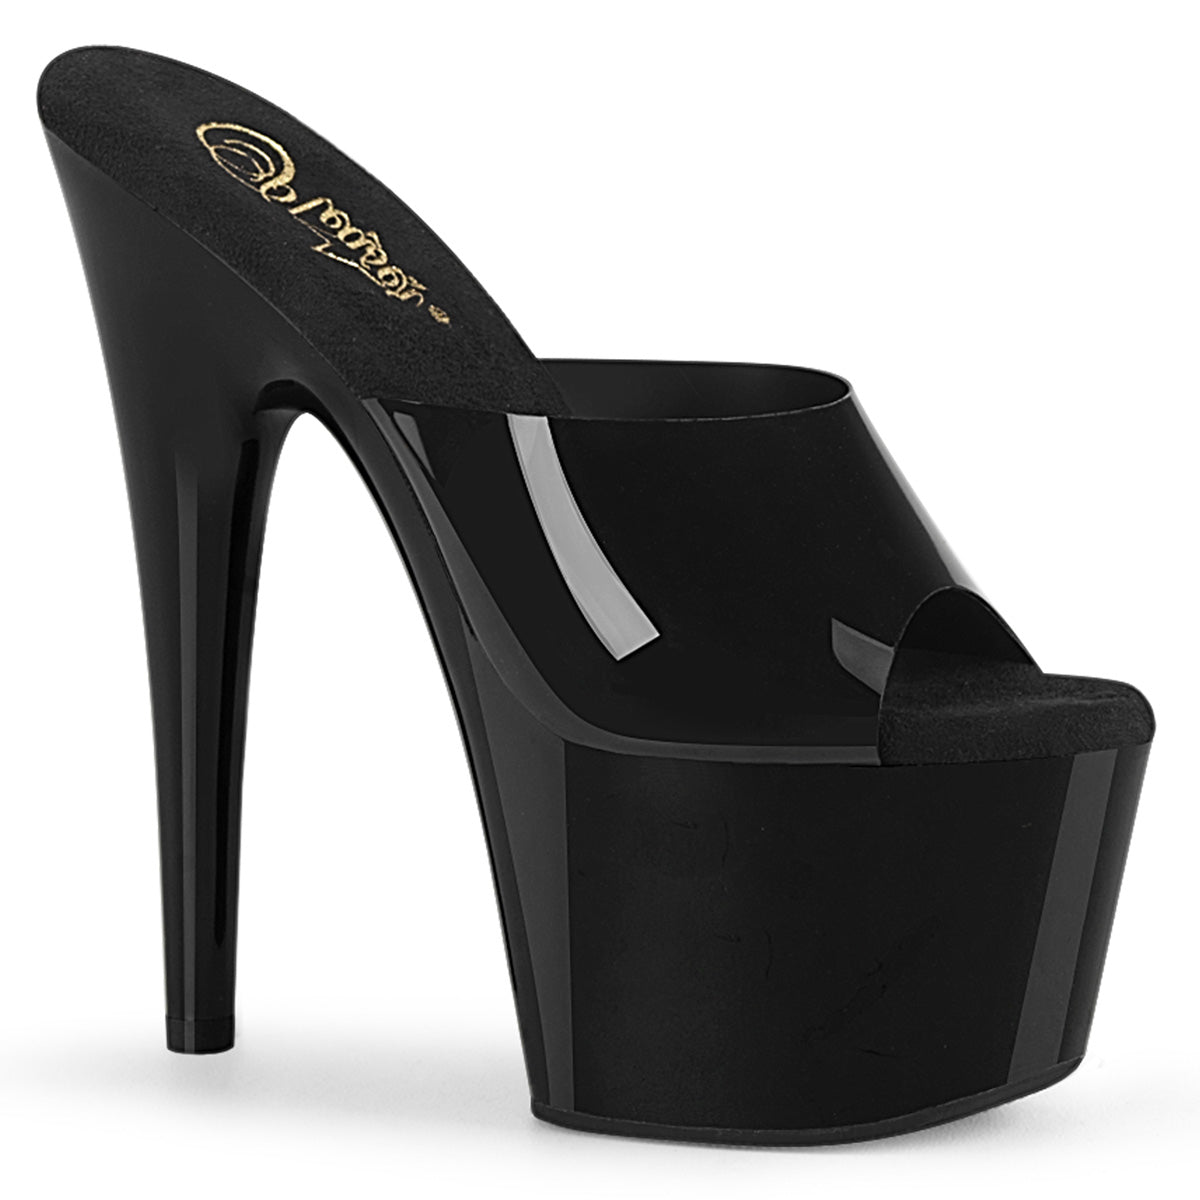 ADORE-701N / BTPU / M 7 "PLEASER FAST DELIVERY 24-48h 